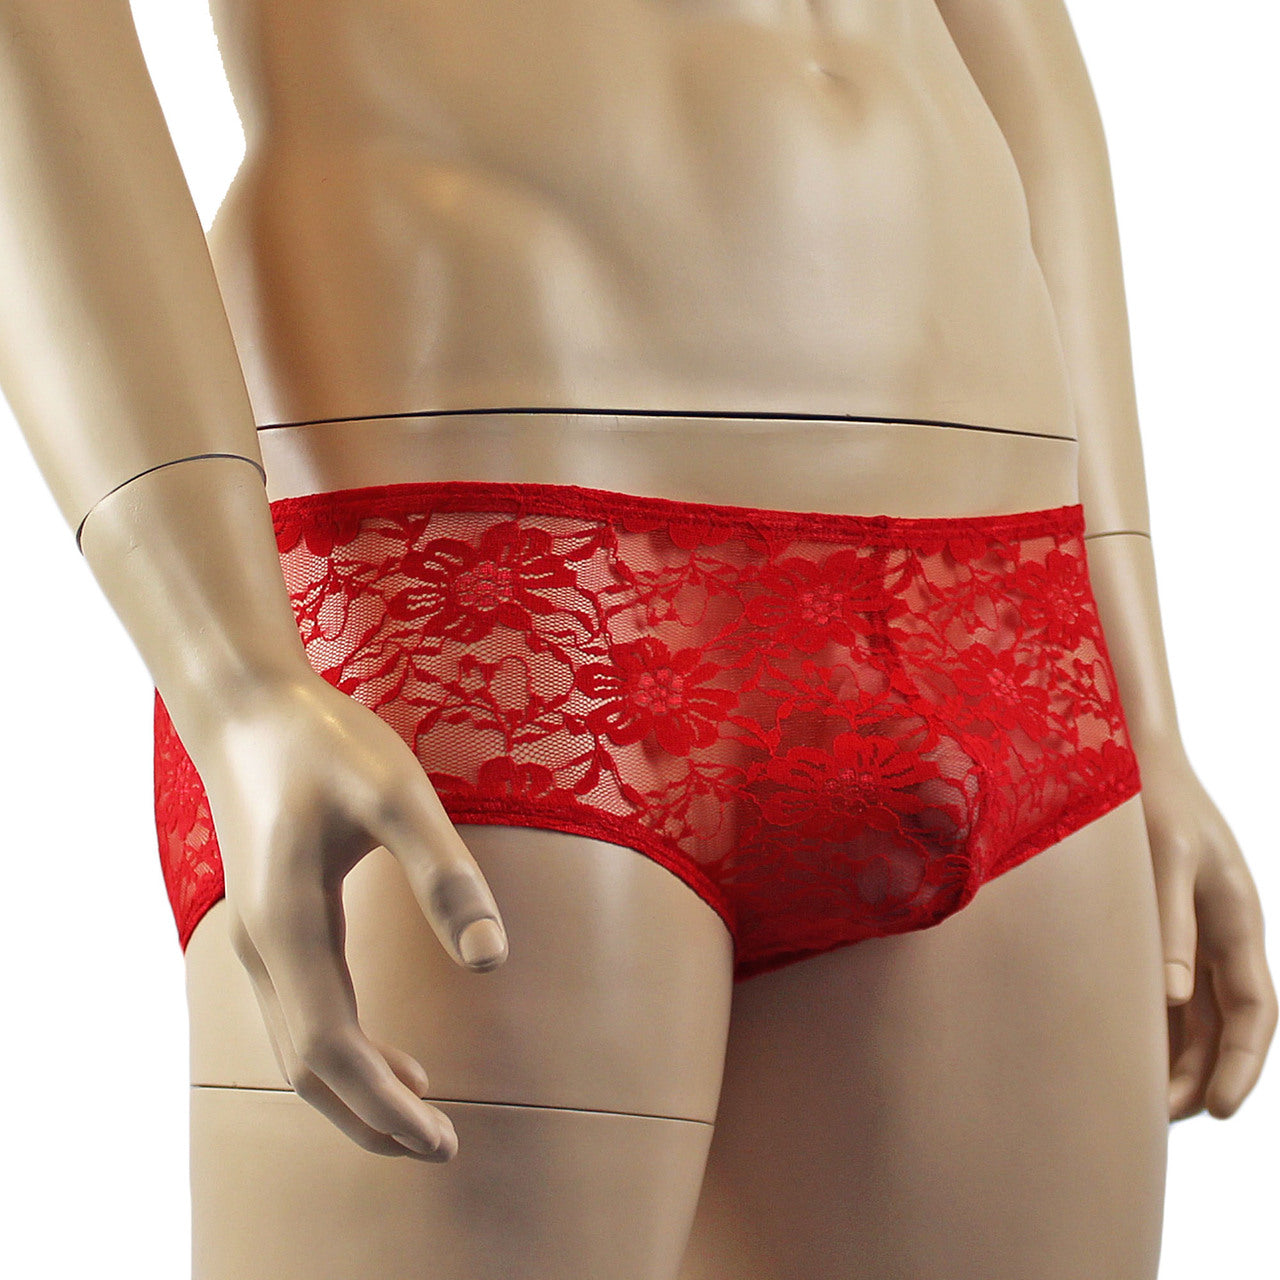 Mens Sexy Lingerie Stretch Lace  Male Panty Bikini Brief Red